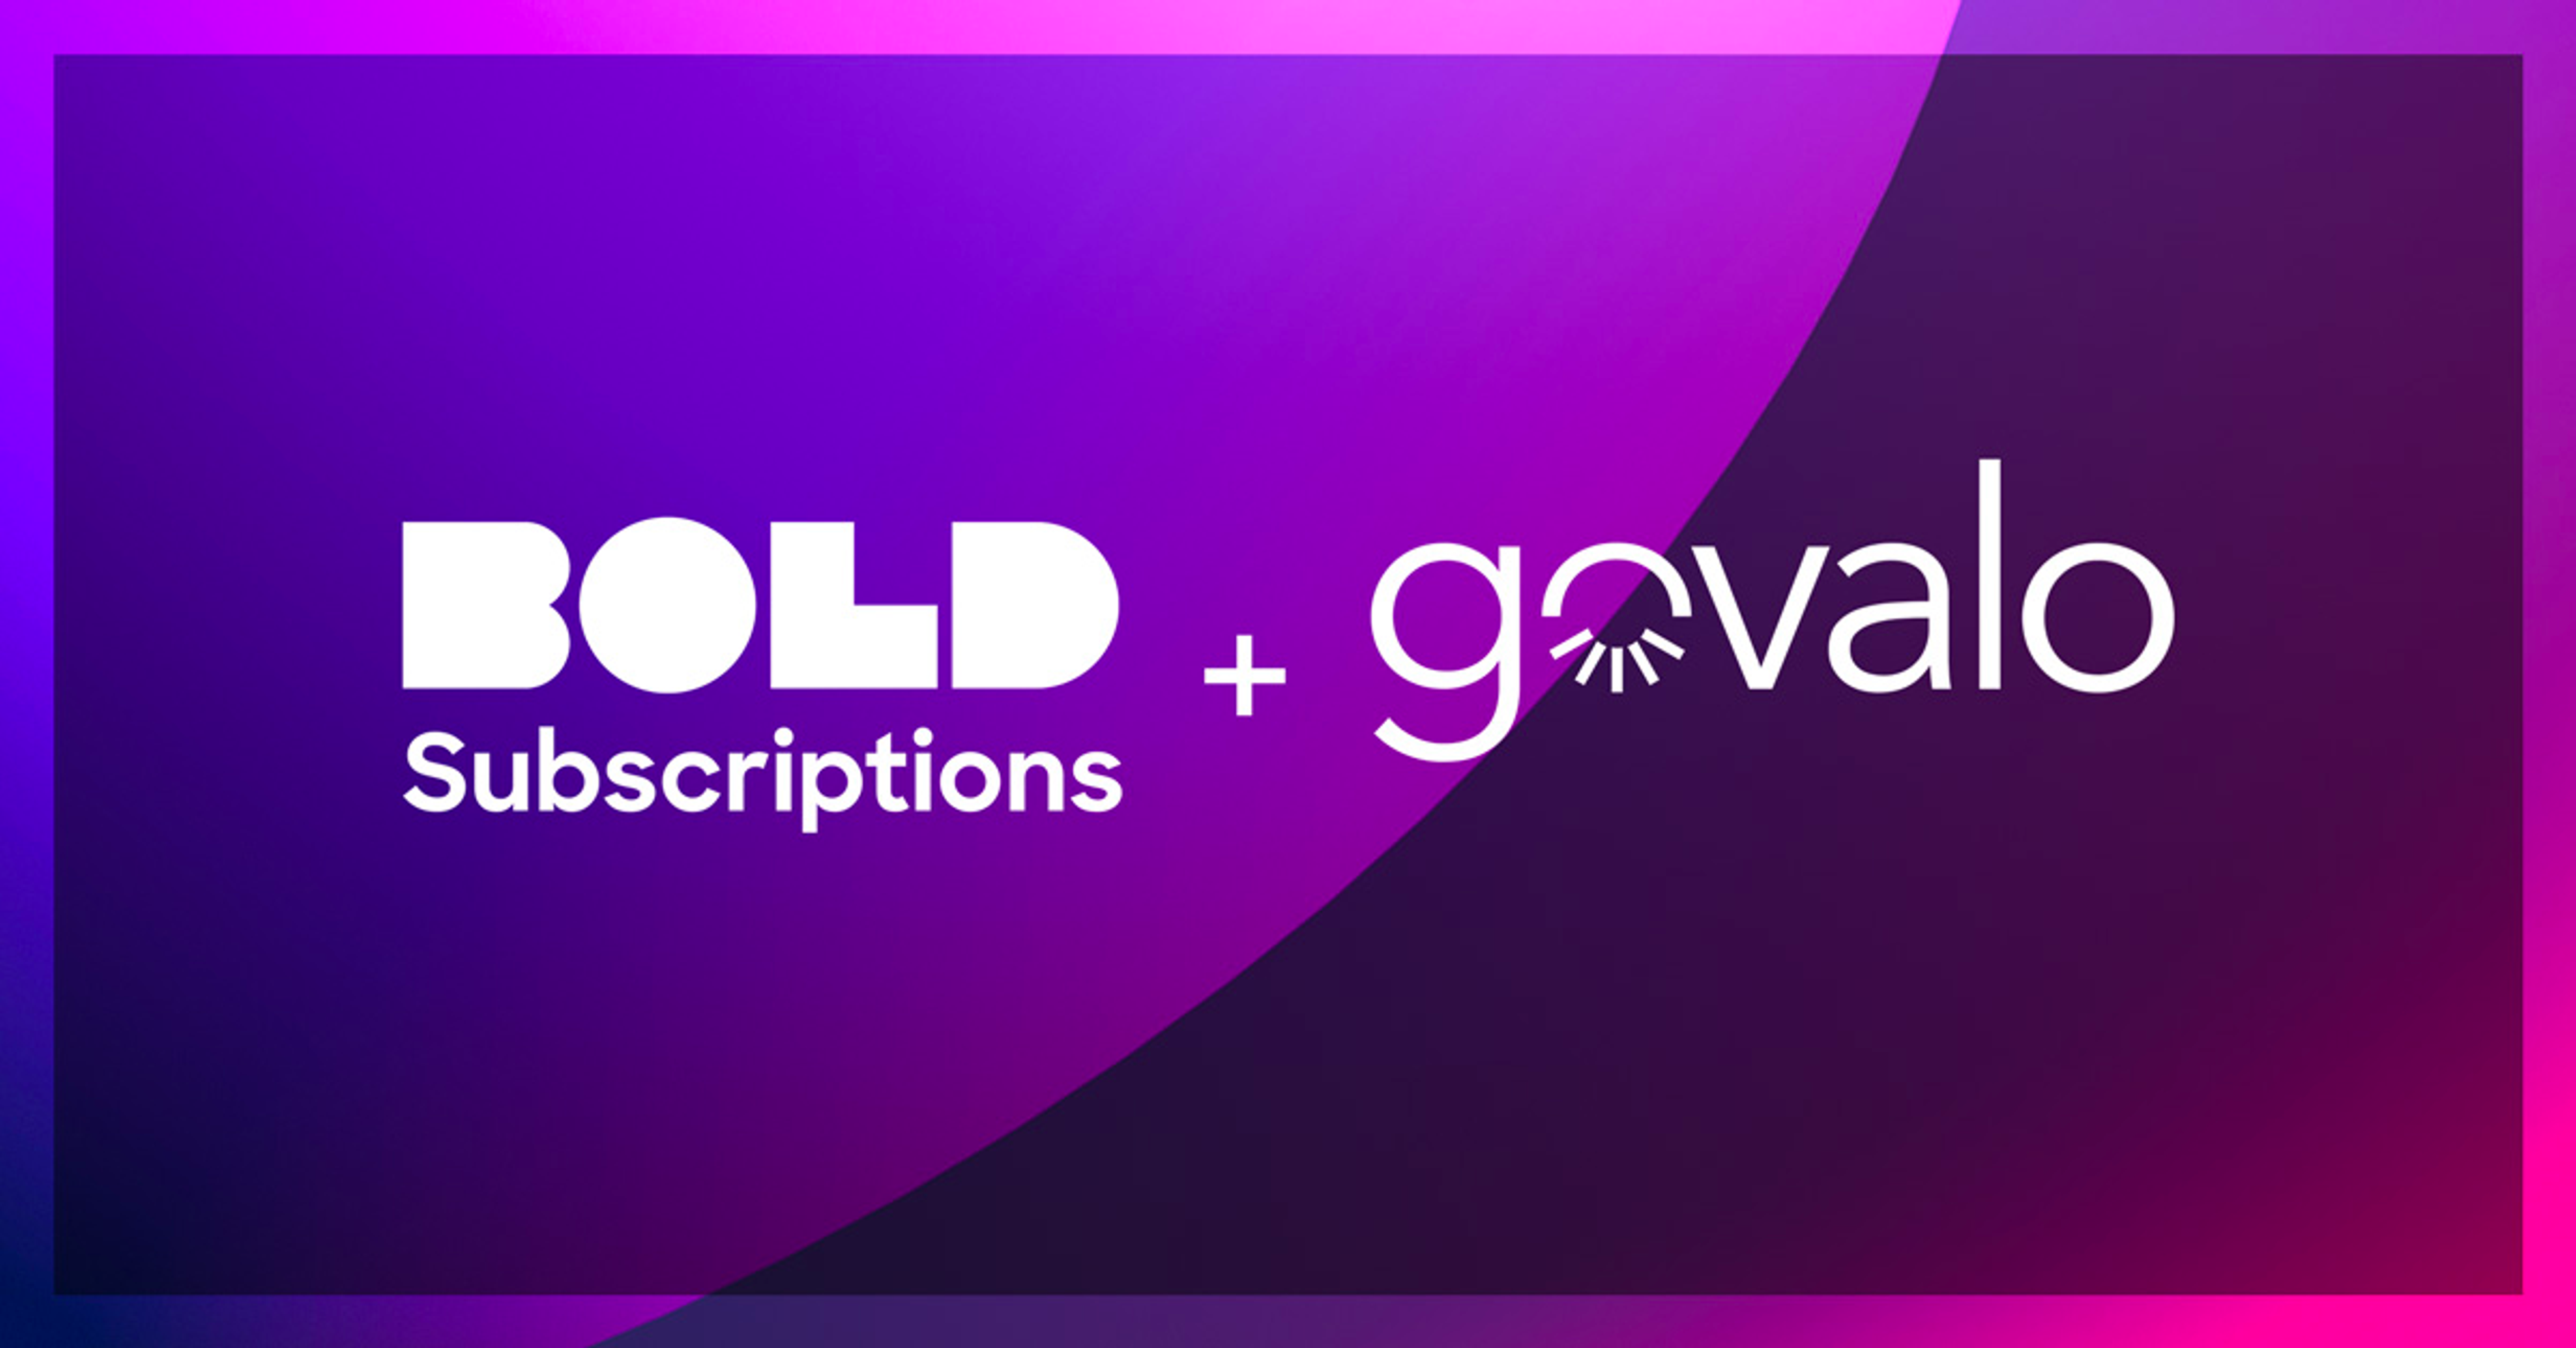 Govalo and Bold Subscriptions logos